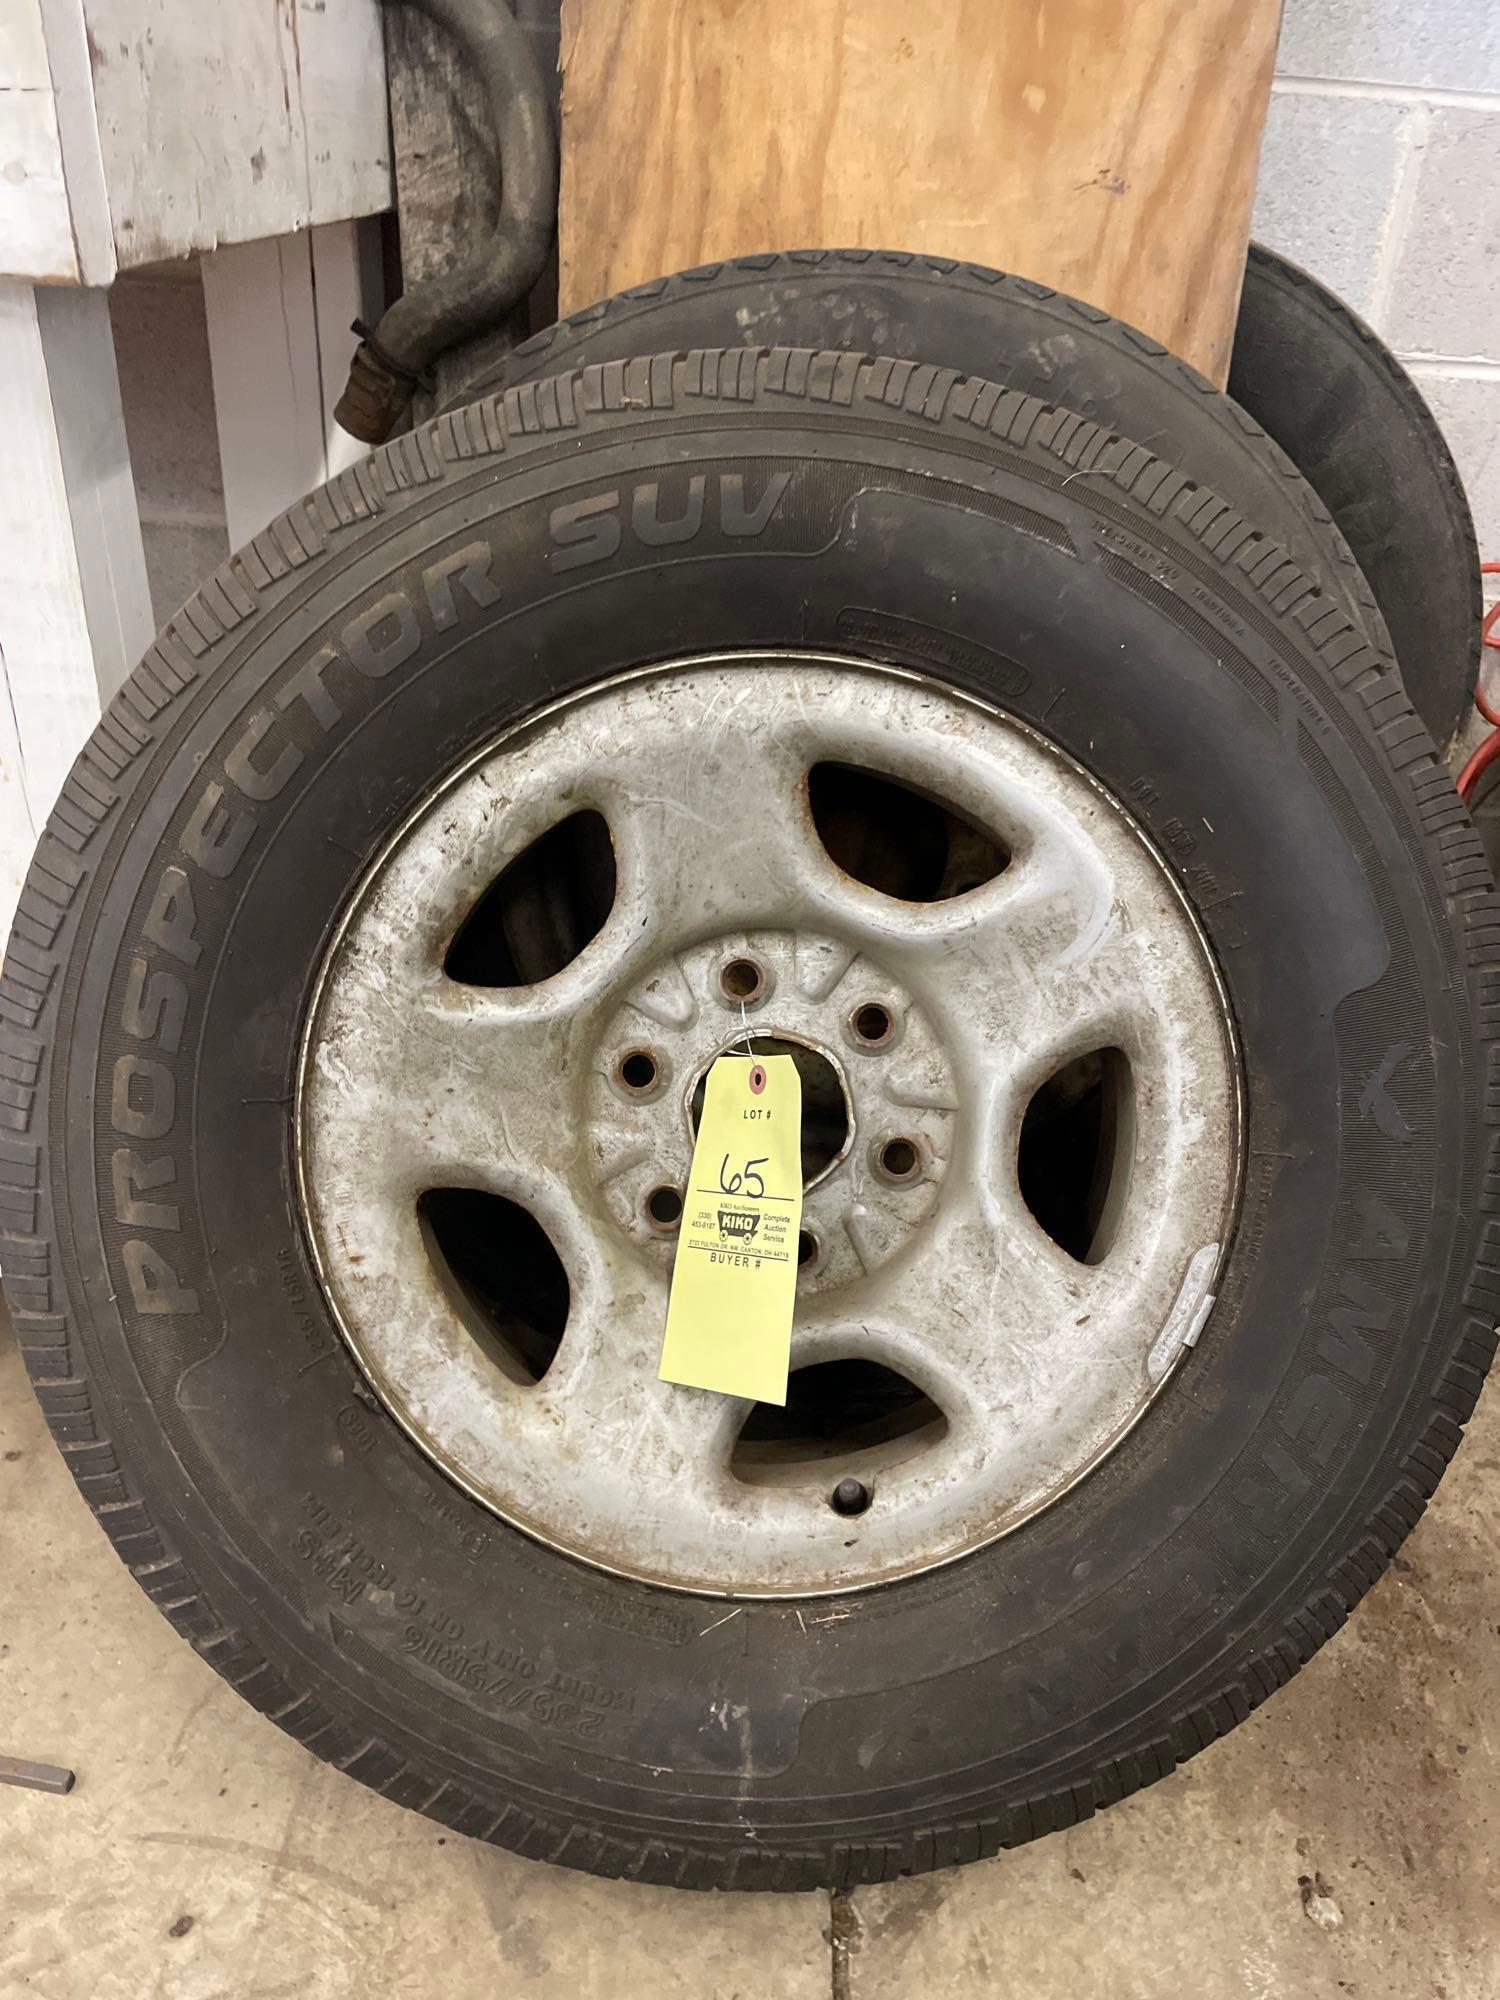 Assorted Tires